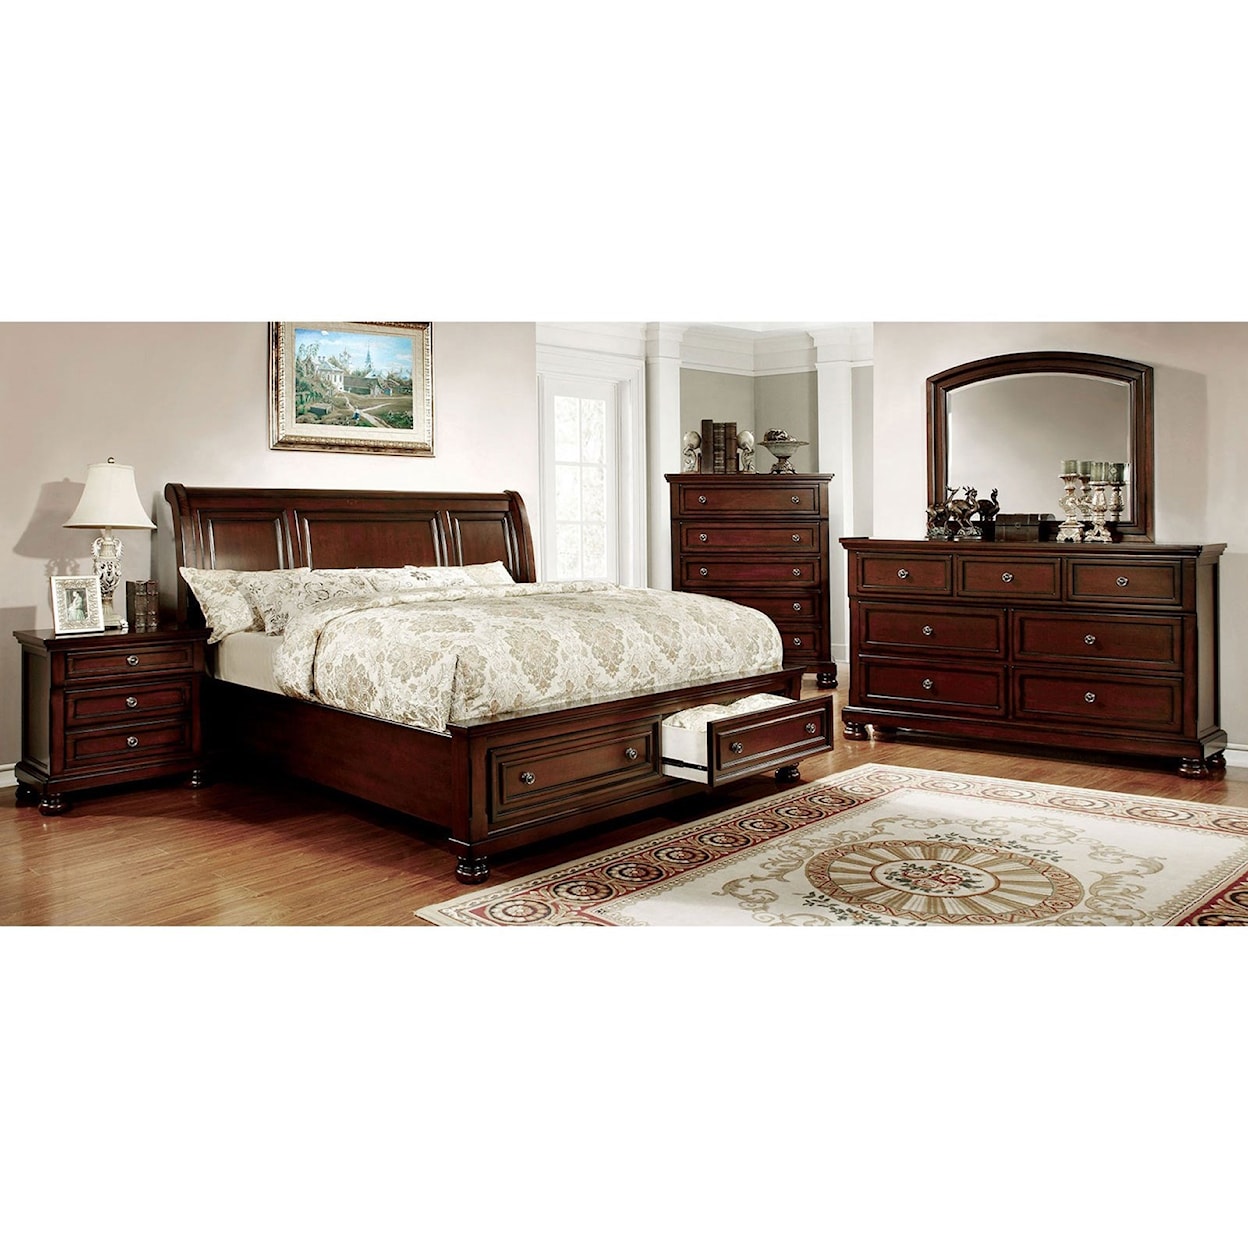 Furniture of America Northville Chest